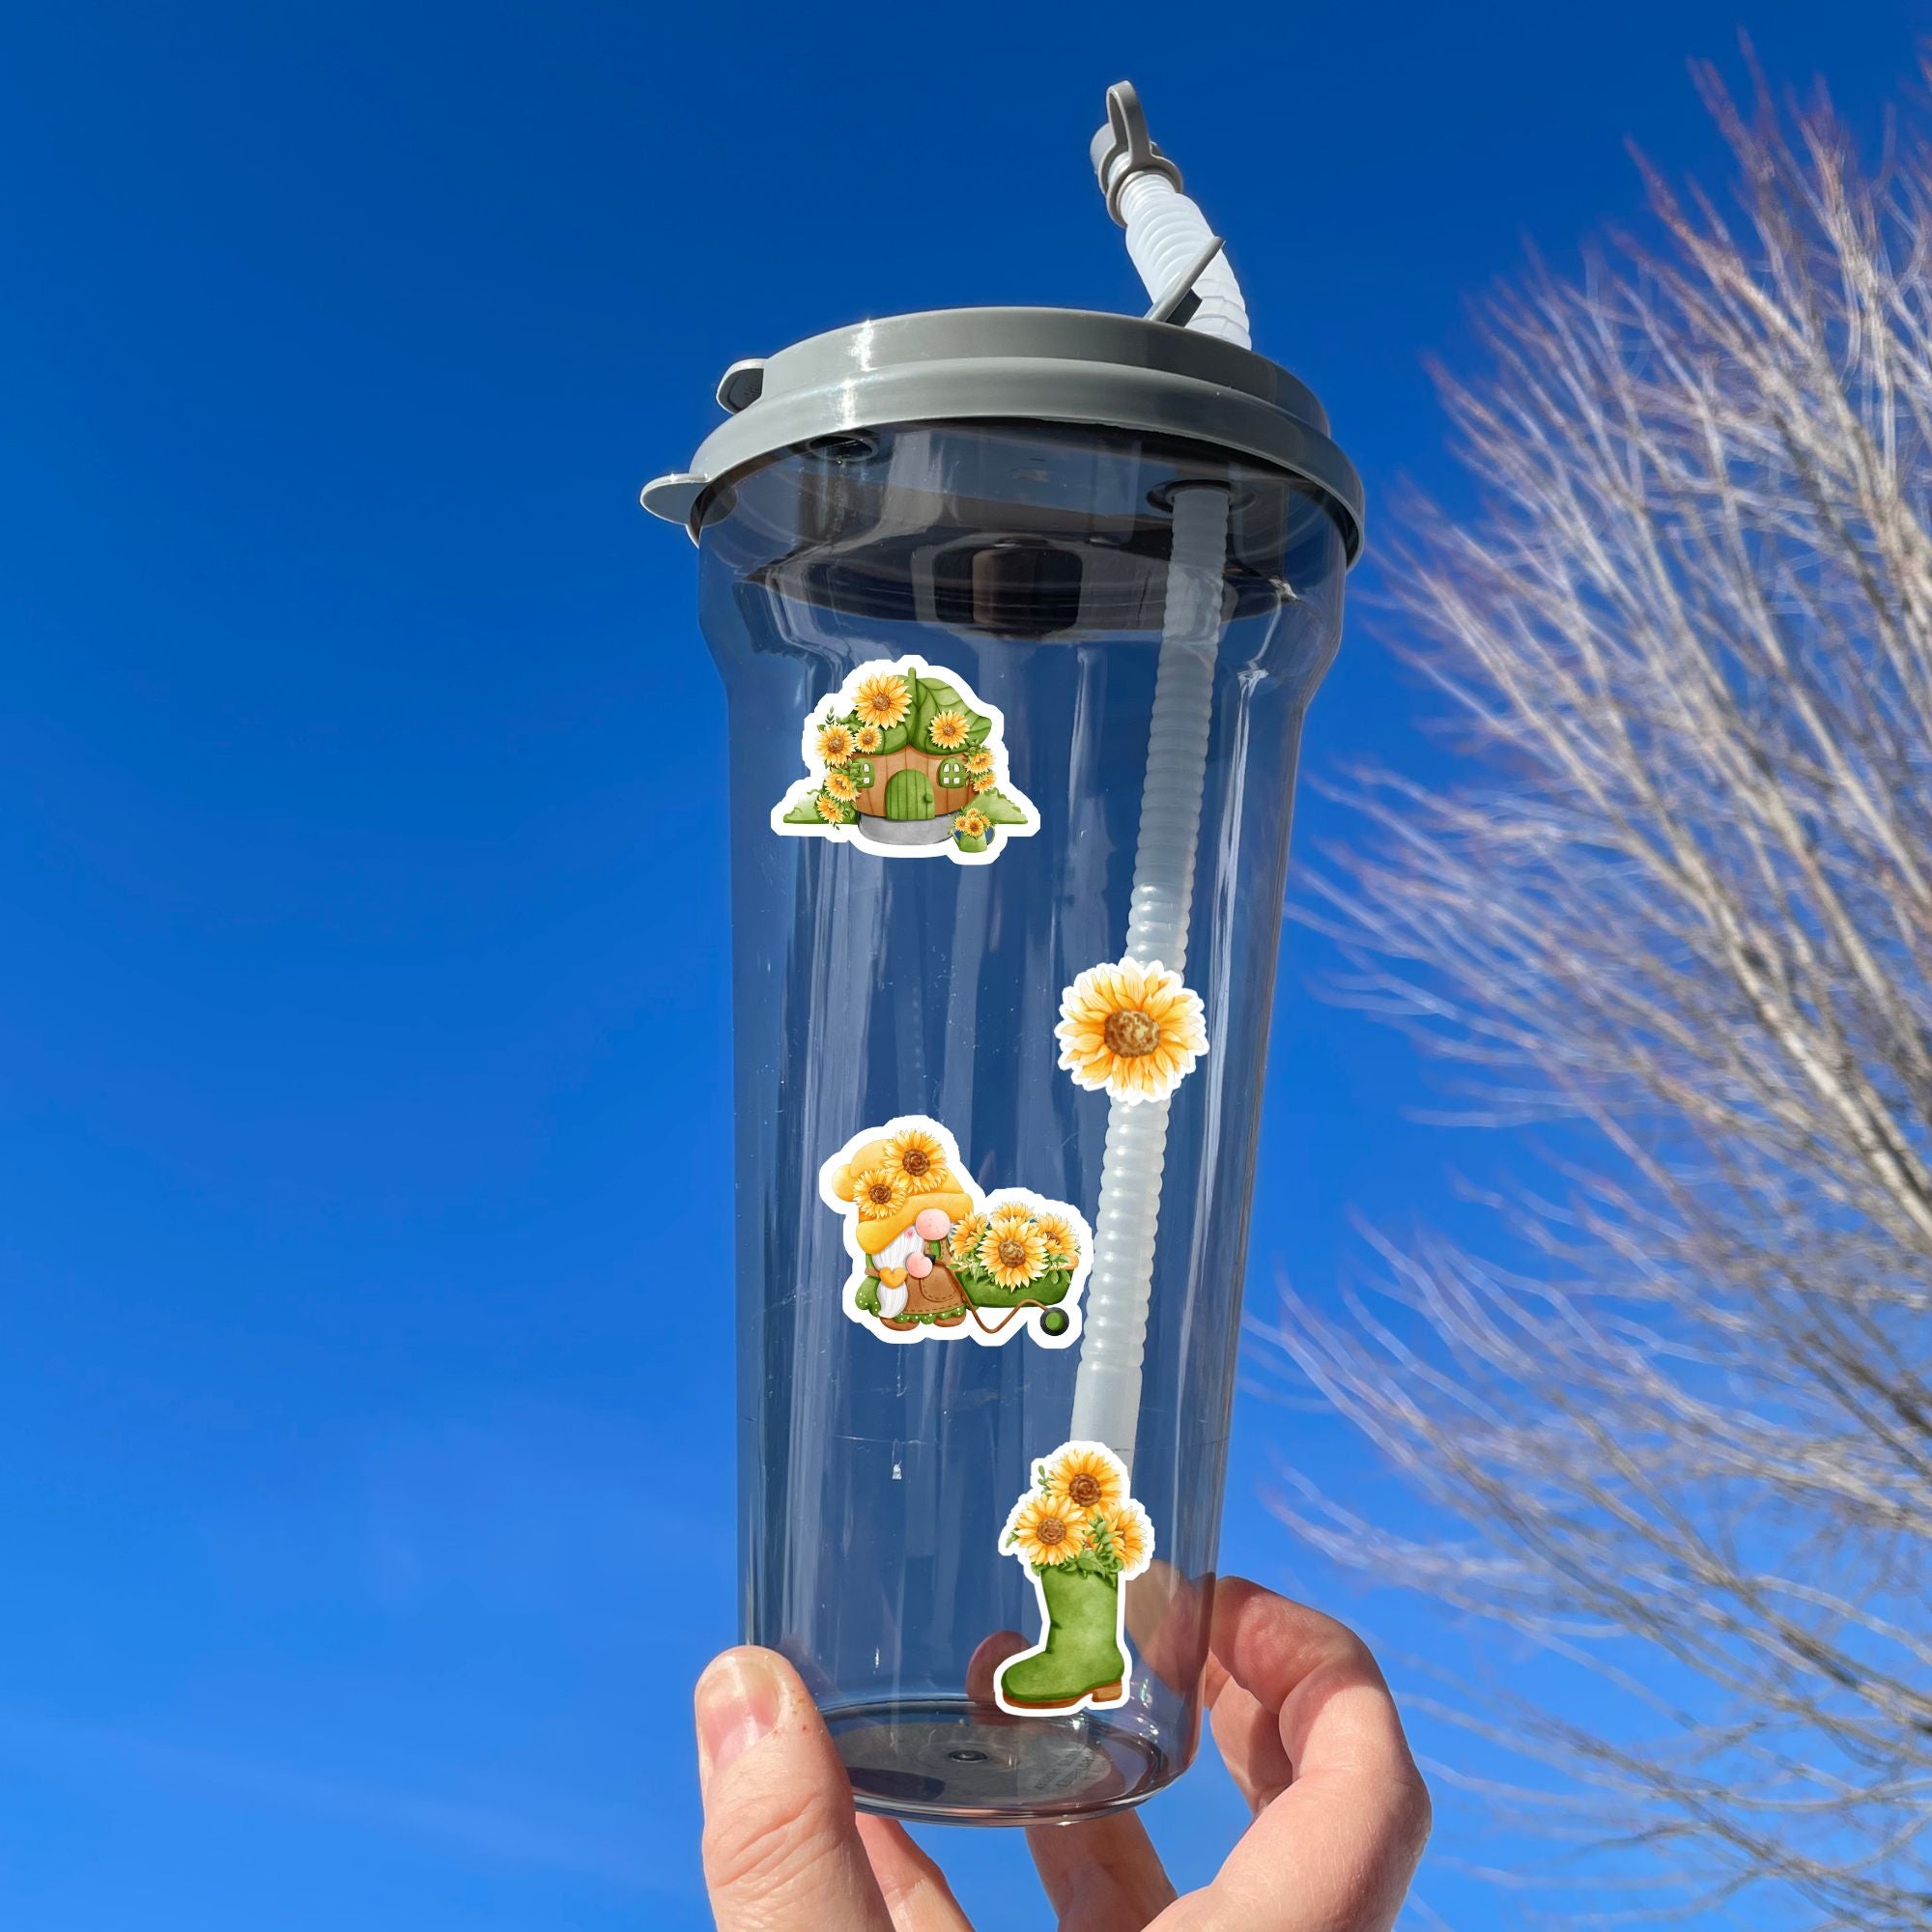 Sunflowers and Gnomes; what a perfect combination! This sticker is filled with stickers of sunflowers and gnomes with sunflowers.  This image shows a water bottle with four stickers applied to it - a gnome house with sunflowers, a single sunflower, a gnome with a wheelbarrow filled with sunflowers, and a boot with sunflowers in it.